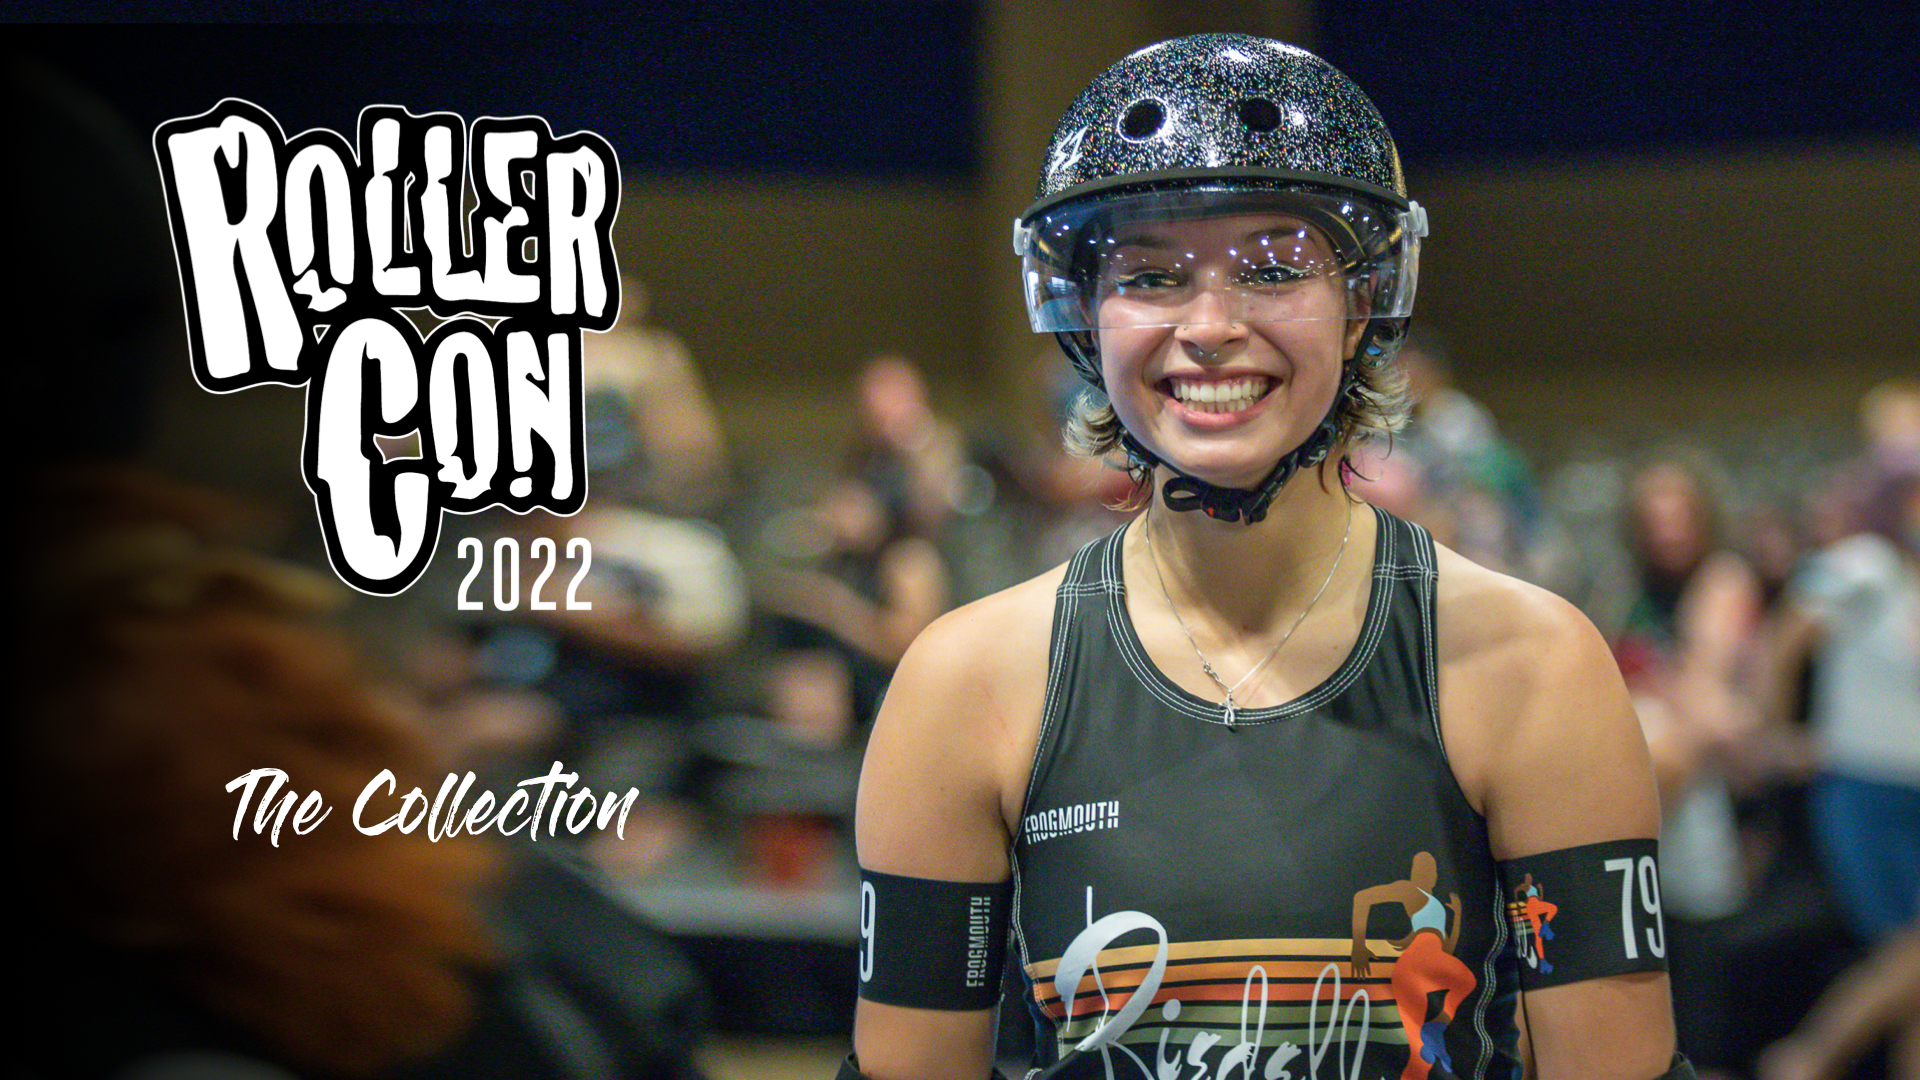 Color picture showing the skater Lil RegulateHer in a Team Riedell jersey, smiling, beside a RollerCon 2002 The Collection graphic